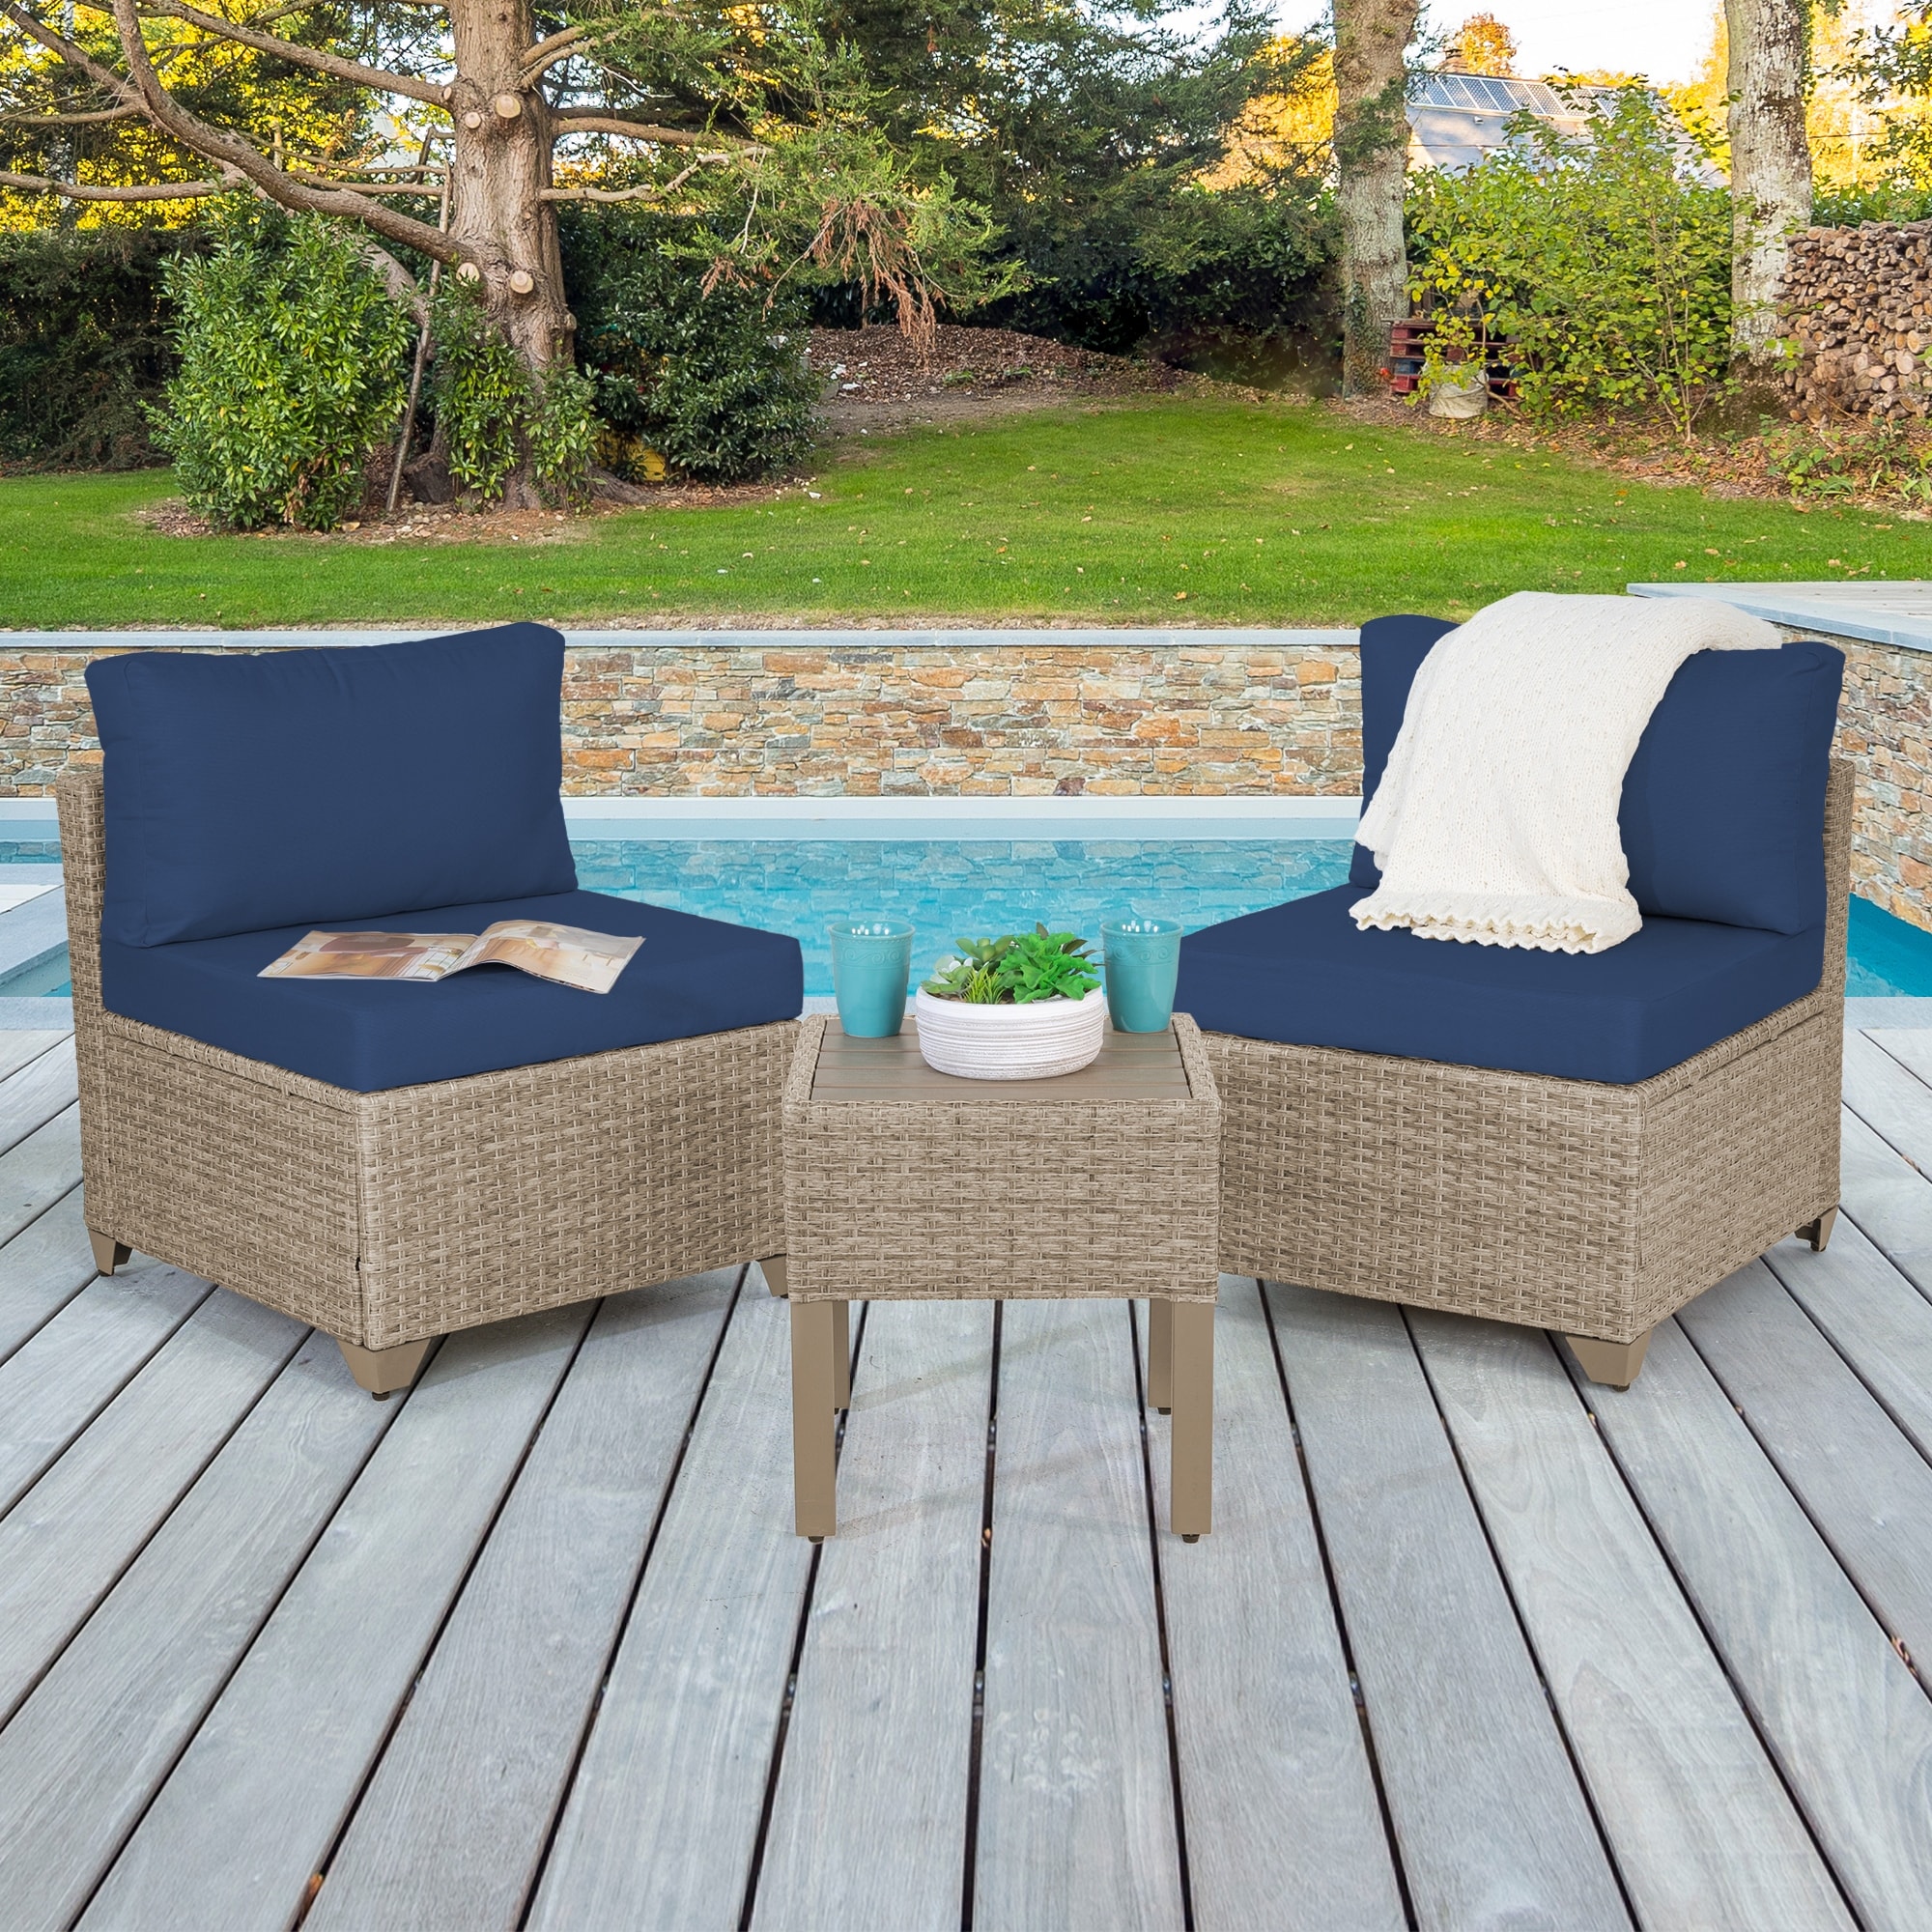 Maui 3-piece Outdoor Conversation Set Including Armless Sofa Seats And End Table In Natural Aged Wicker